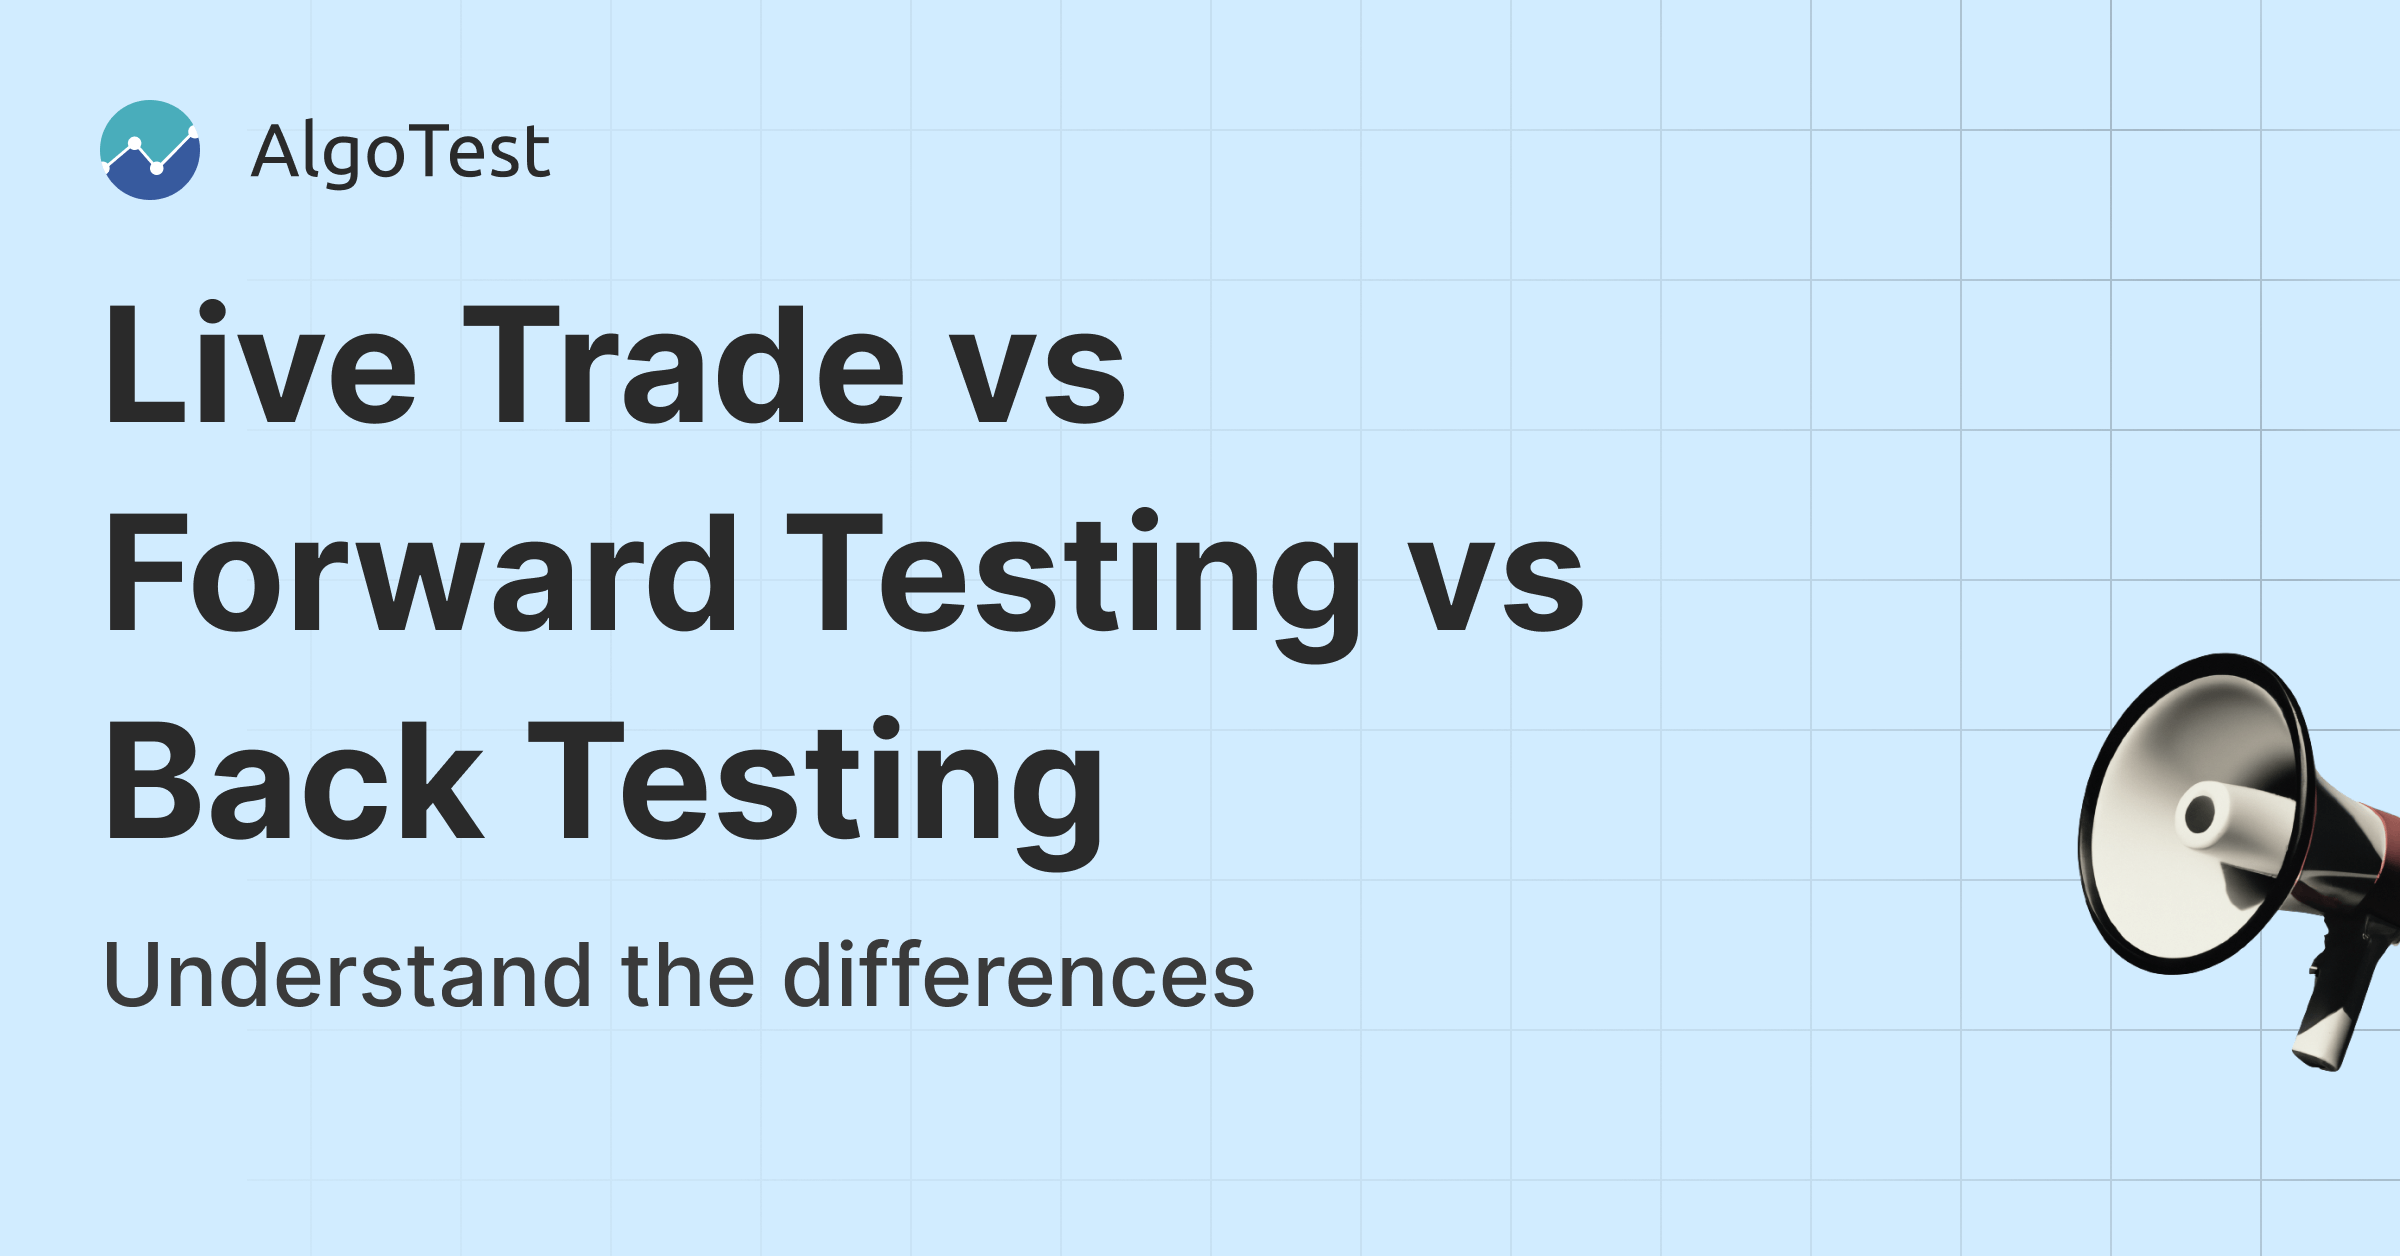 Understand the differences between live testing, forward testing and back testing and why the results differ from each other.